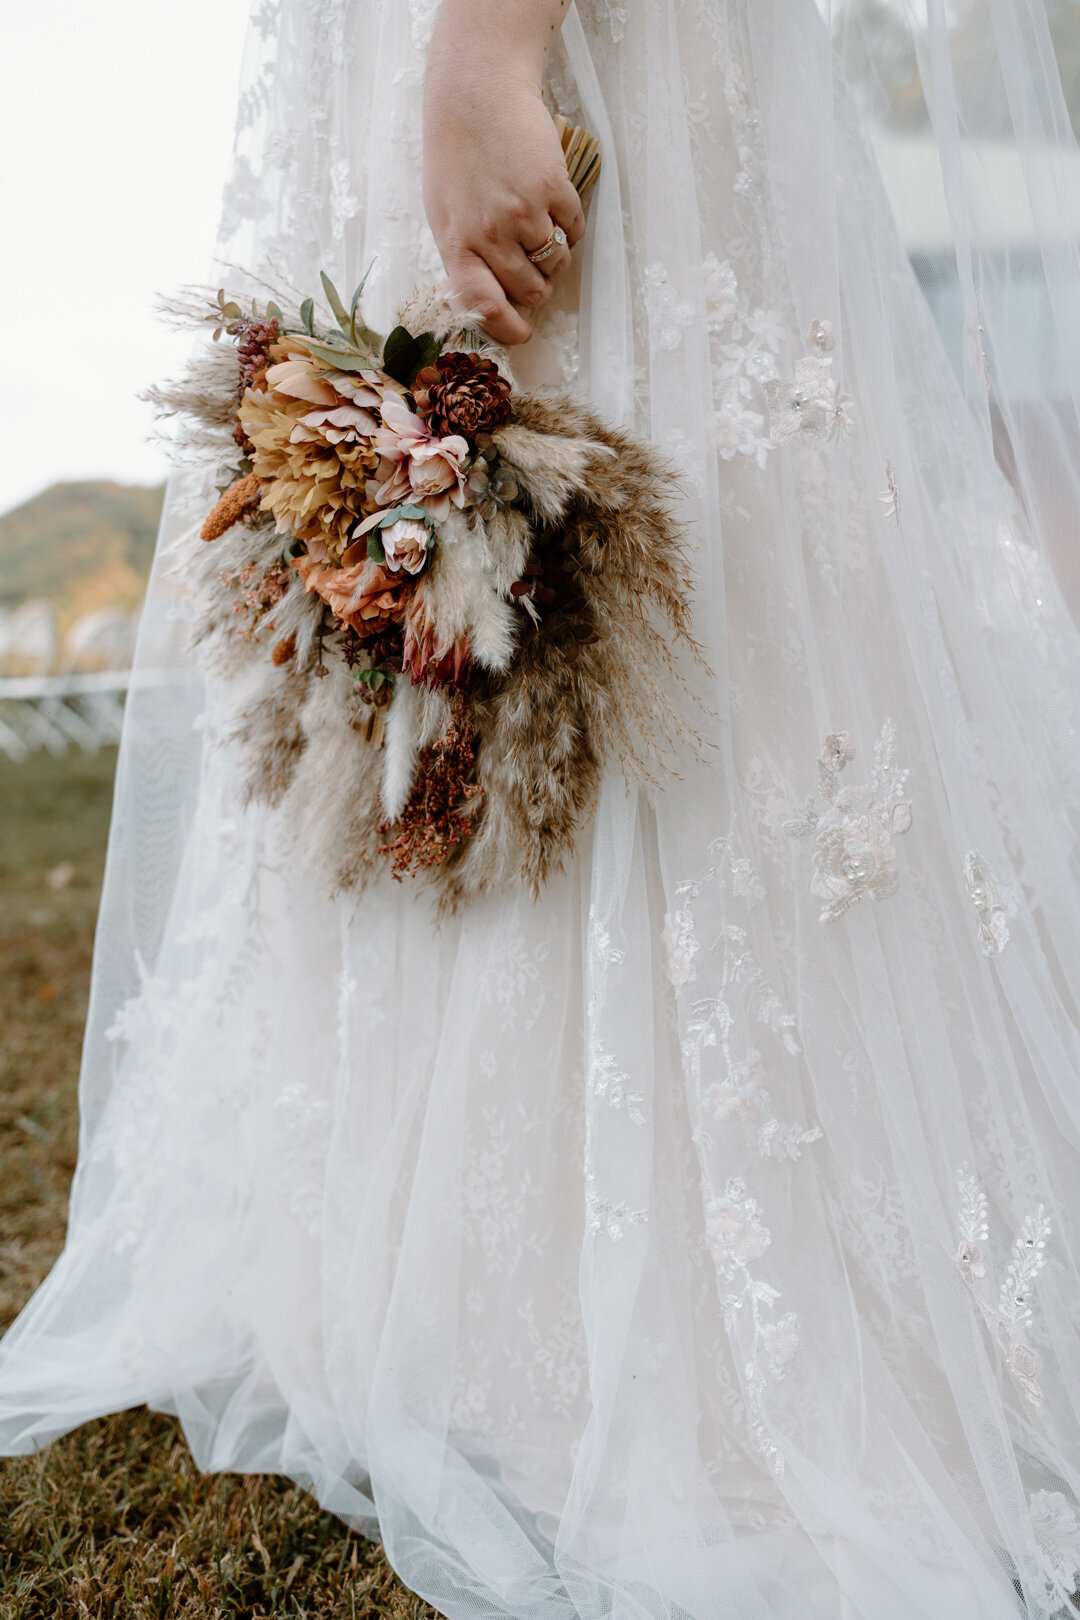 Boho bride carrying a fall bouquet with fall colors and feathers.